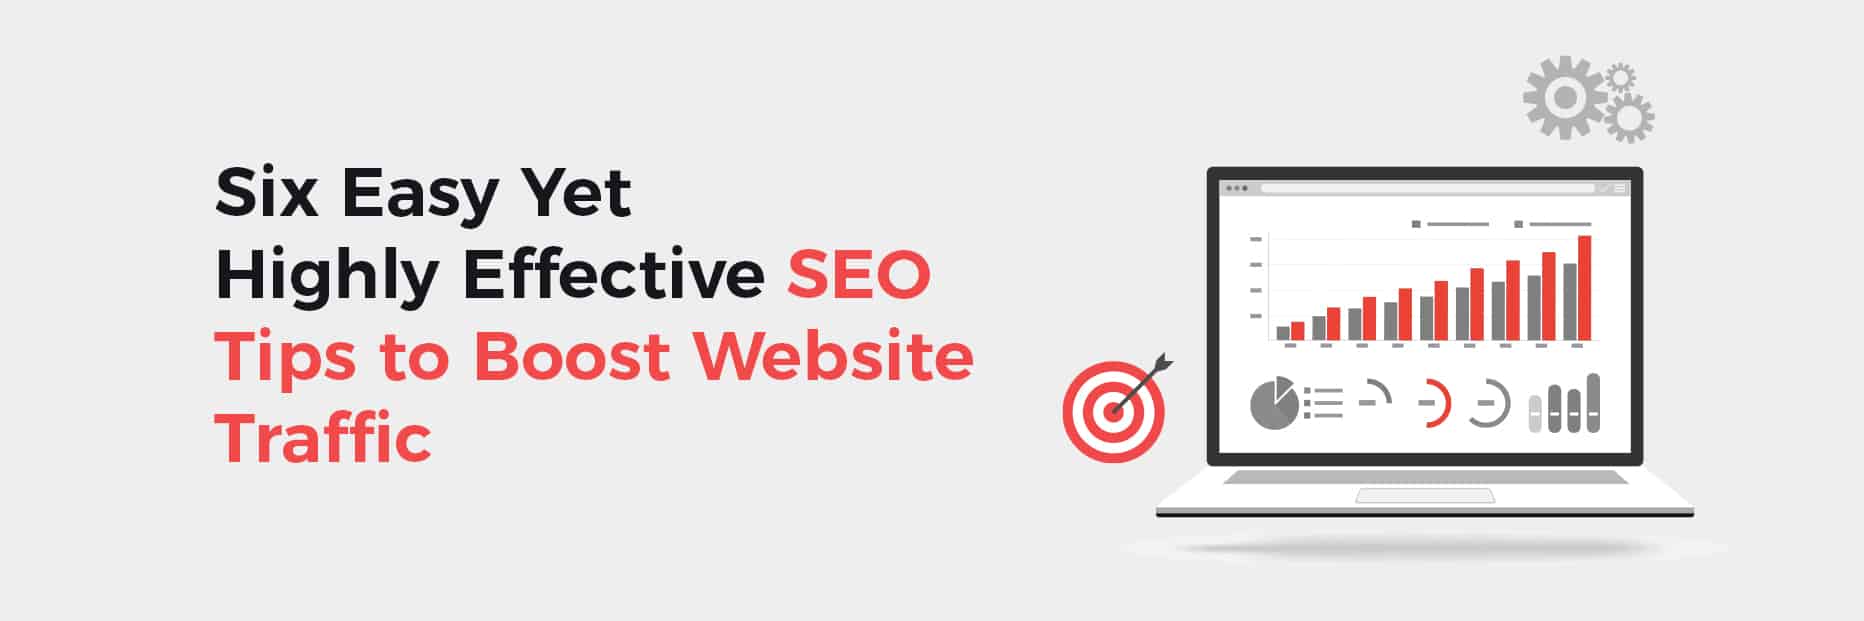 Highly Effective SEO Tips